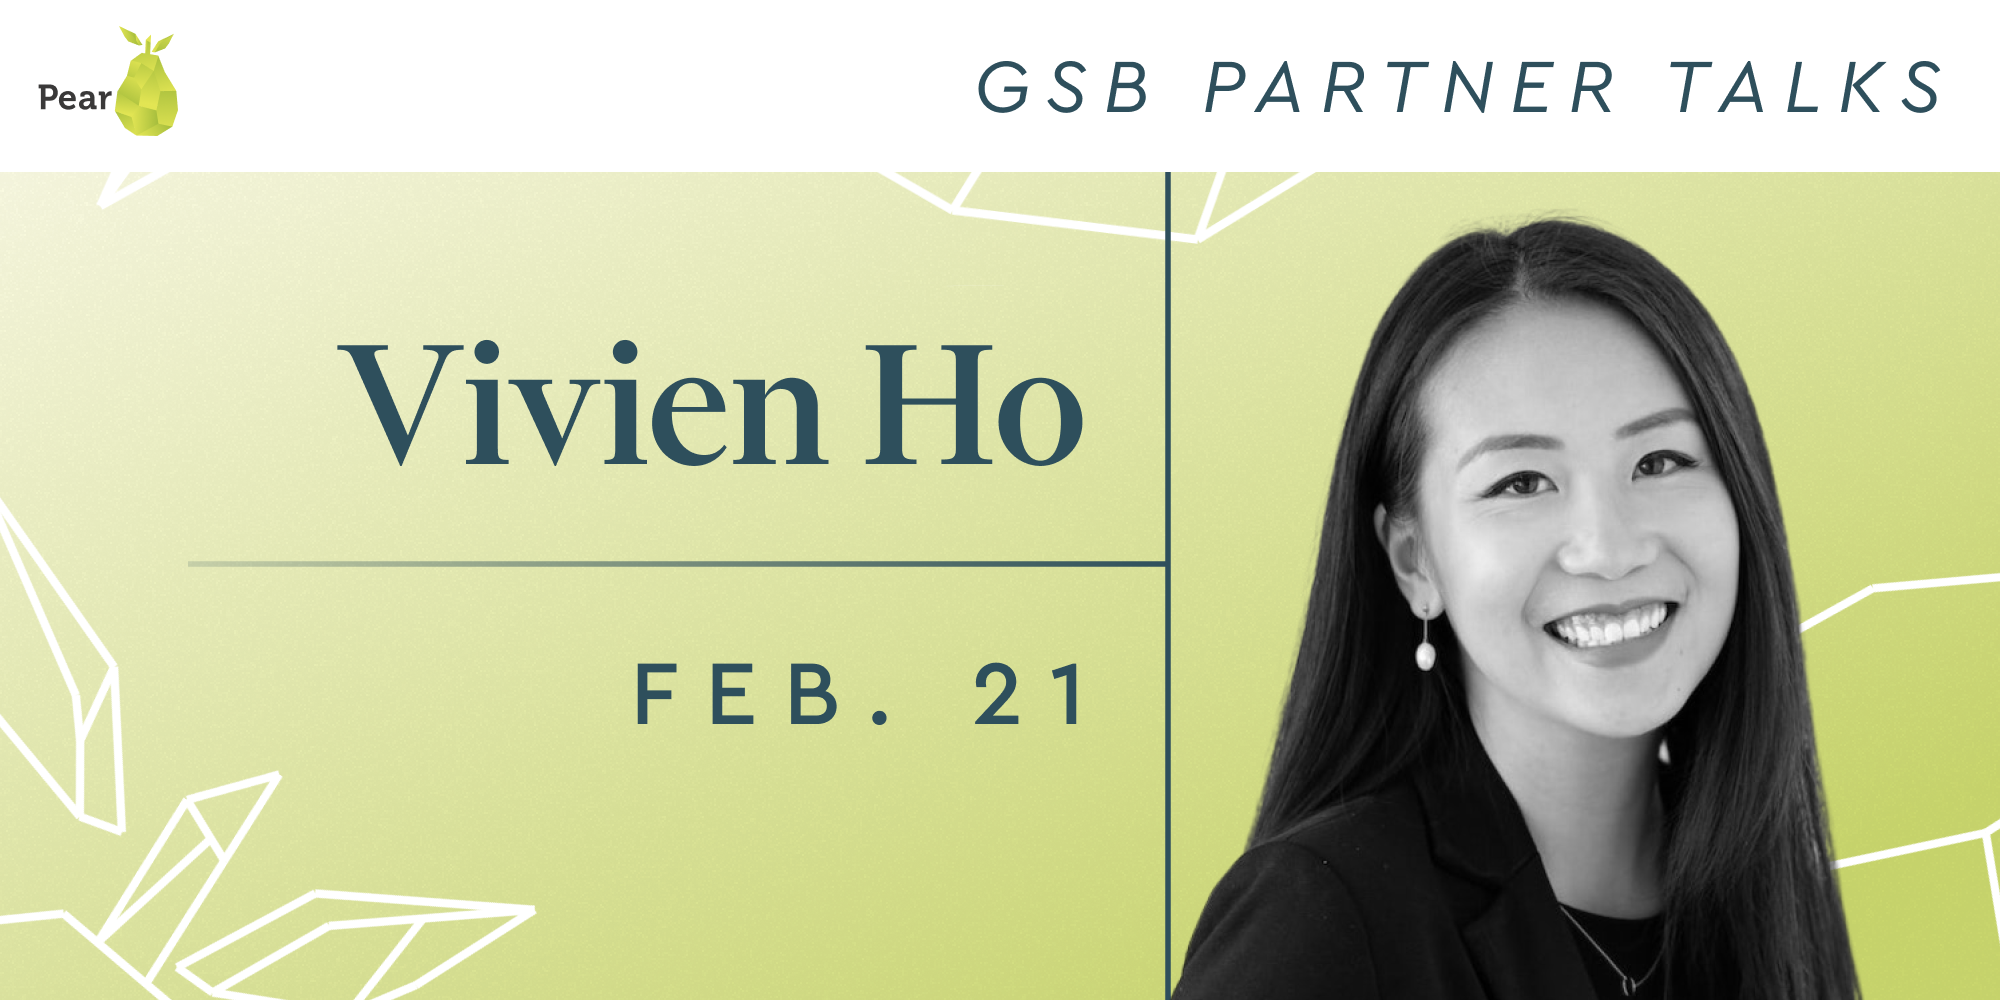 resources GSB Partner Talks: Healthcare and ClimateTech with Pear VC’s Vivien Ho